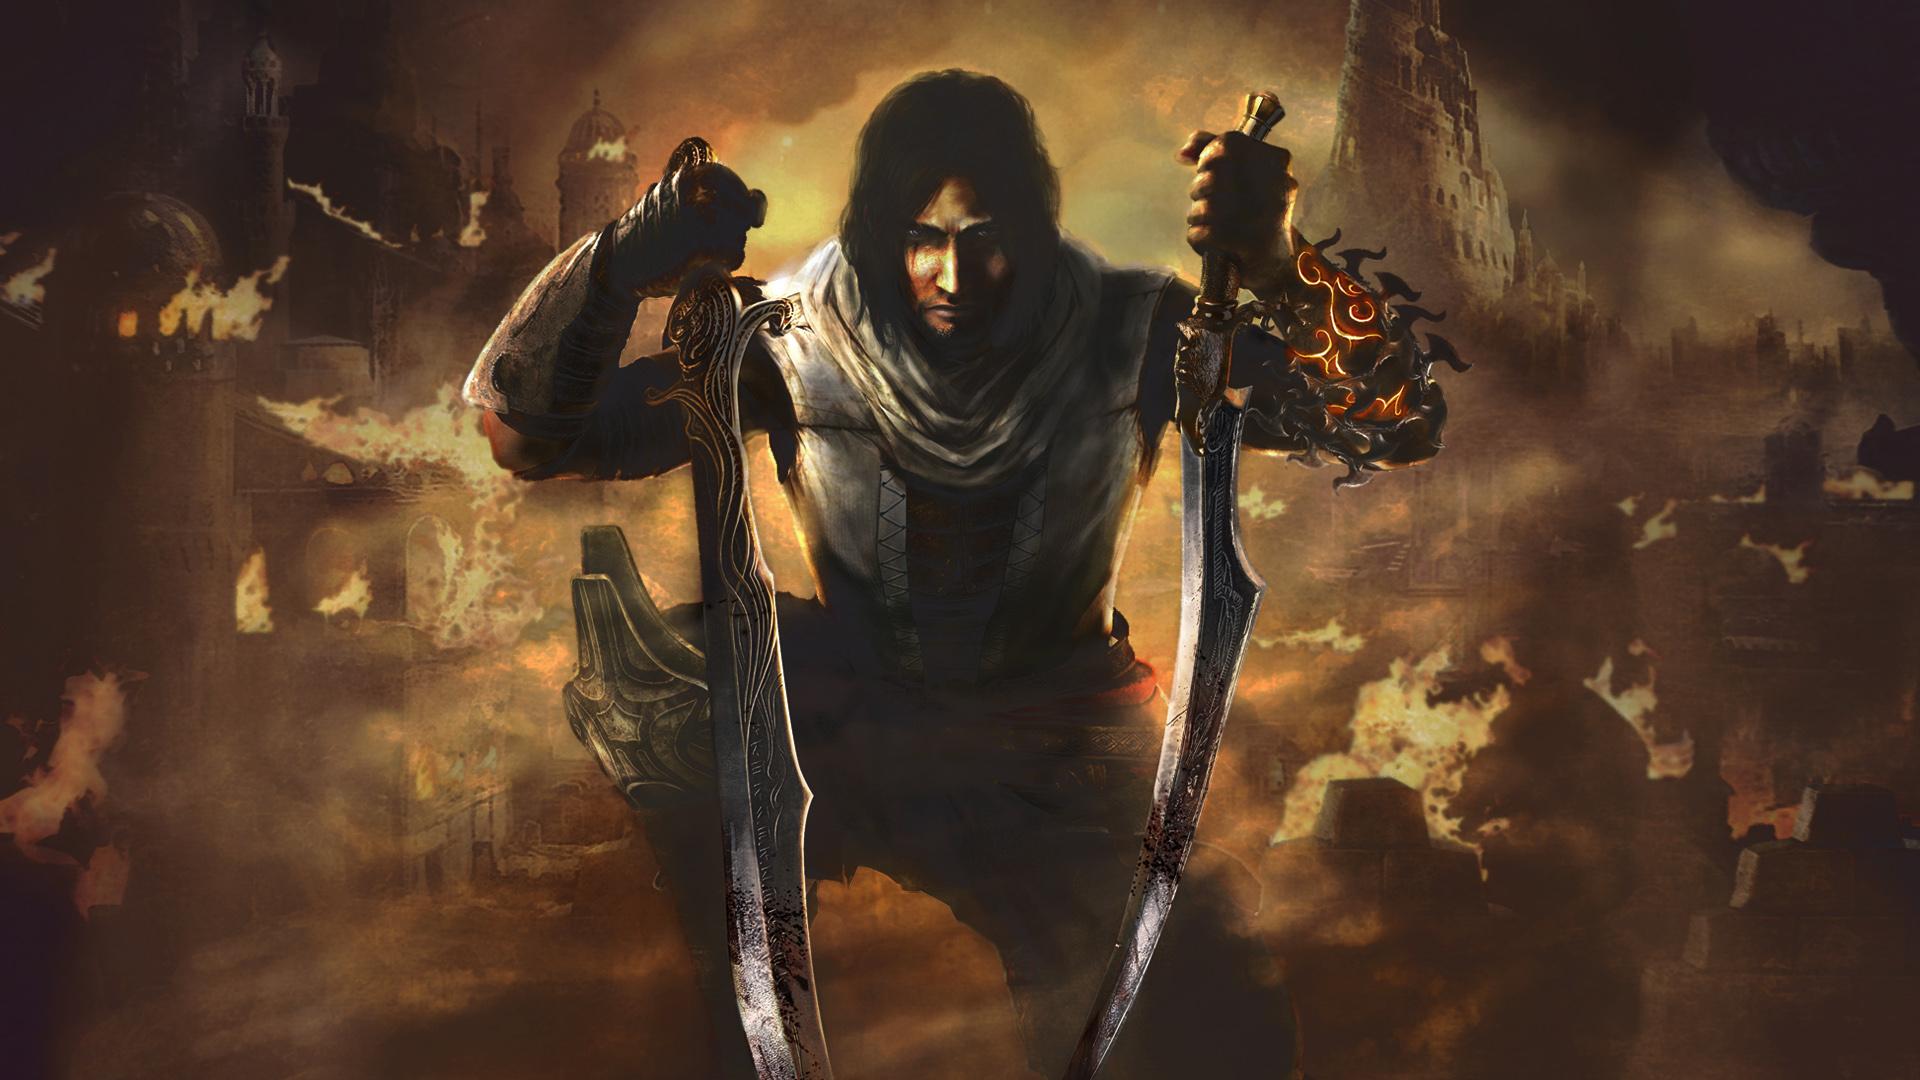 Prince Of Persia HD Wallpaper Background Image